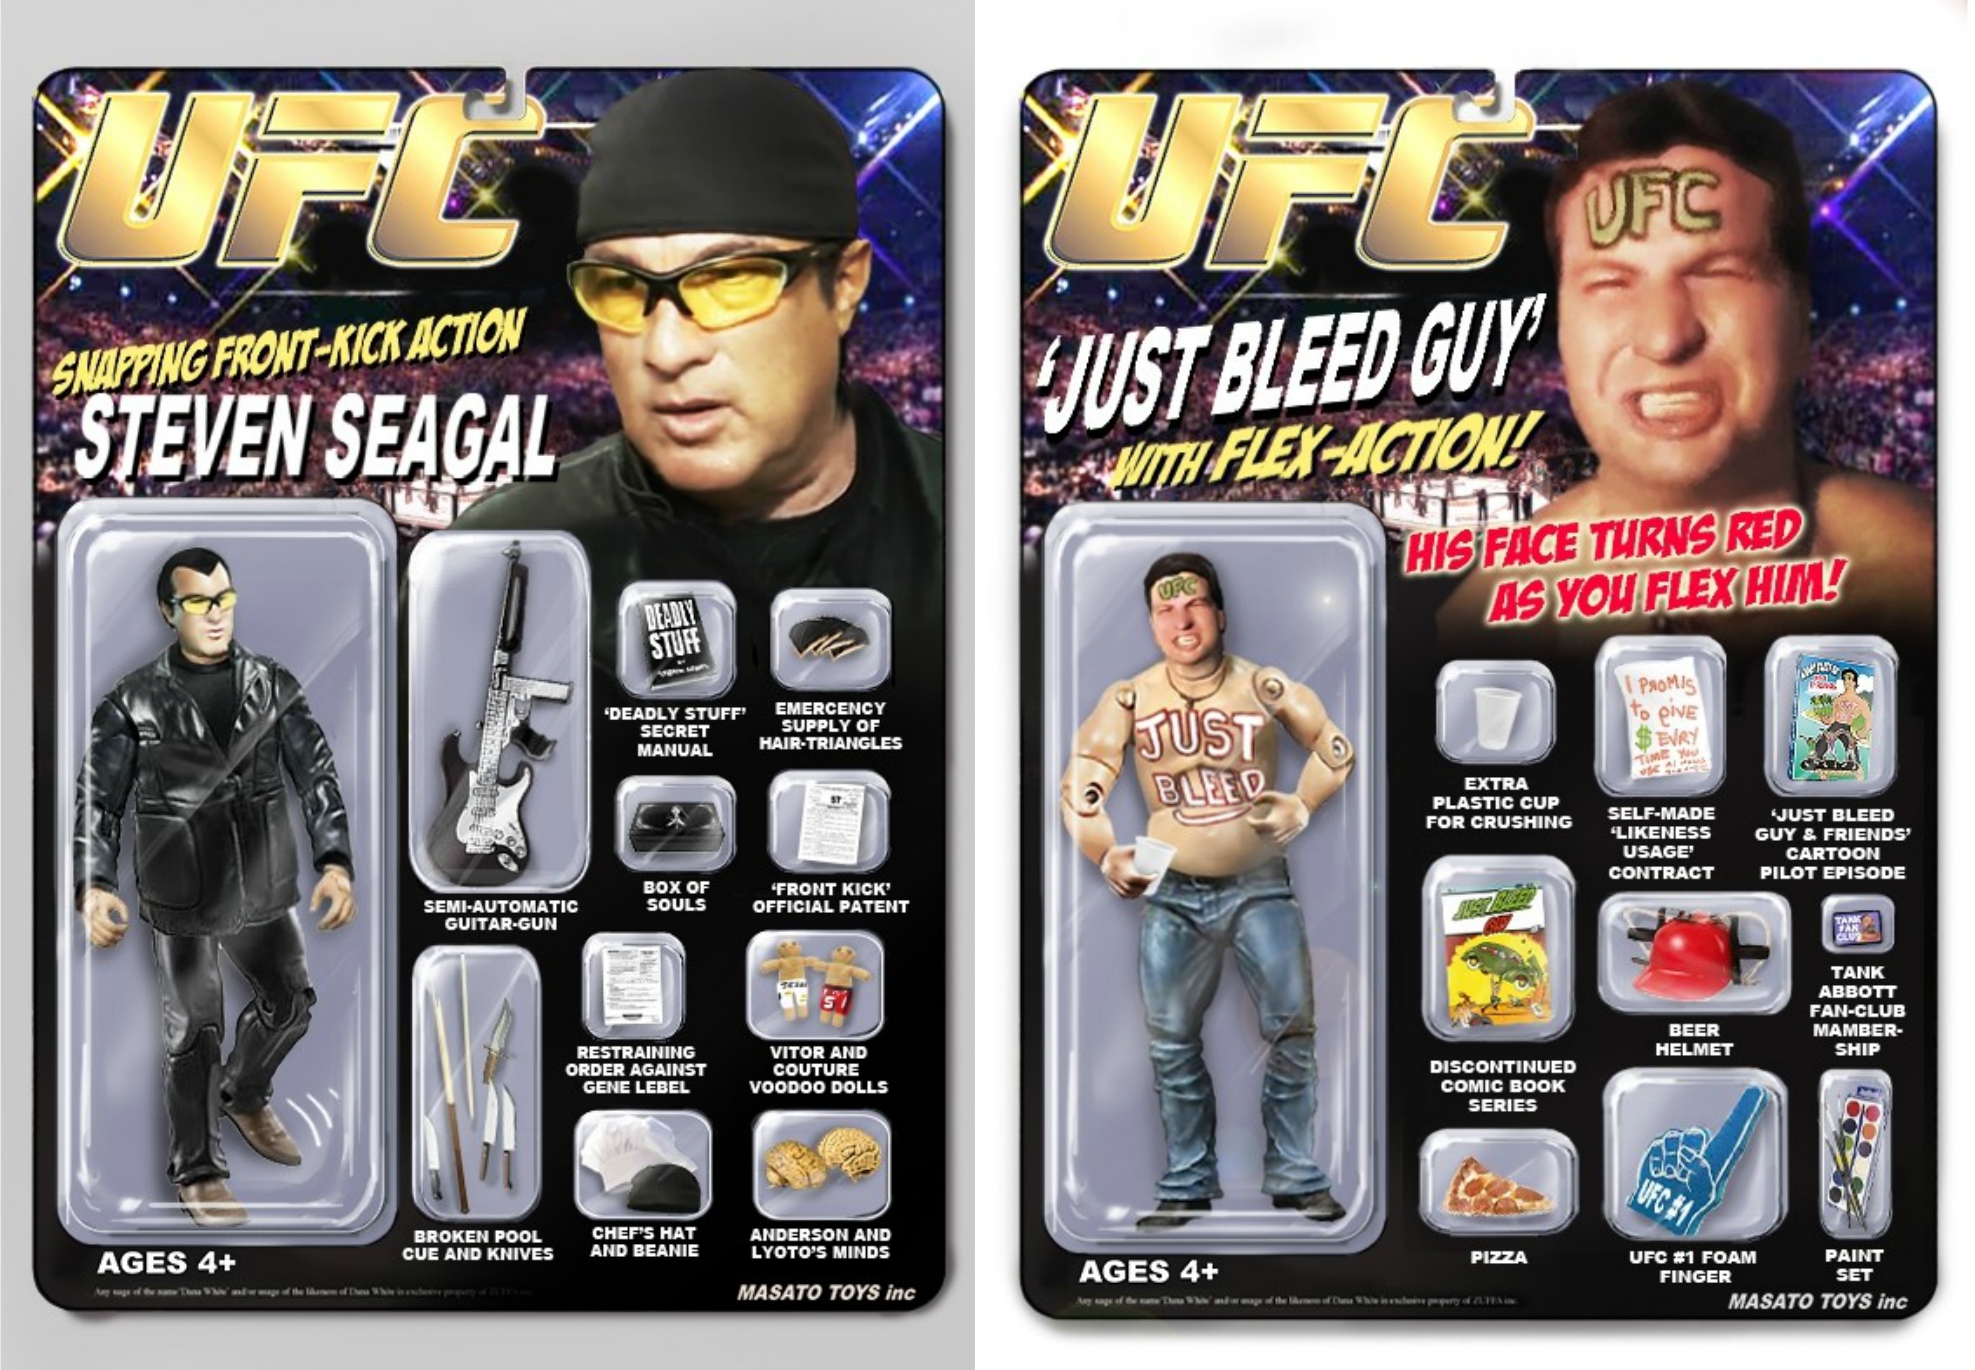 Funny: The Best of UFC Romoshop Action Figures from Masato Toys